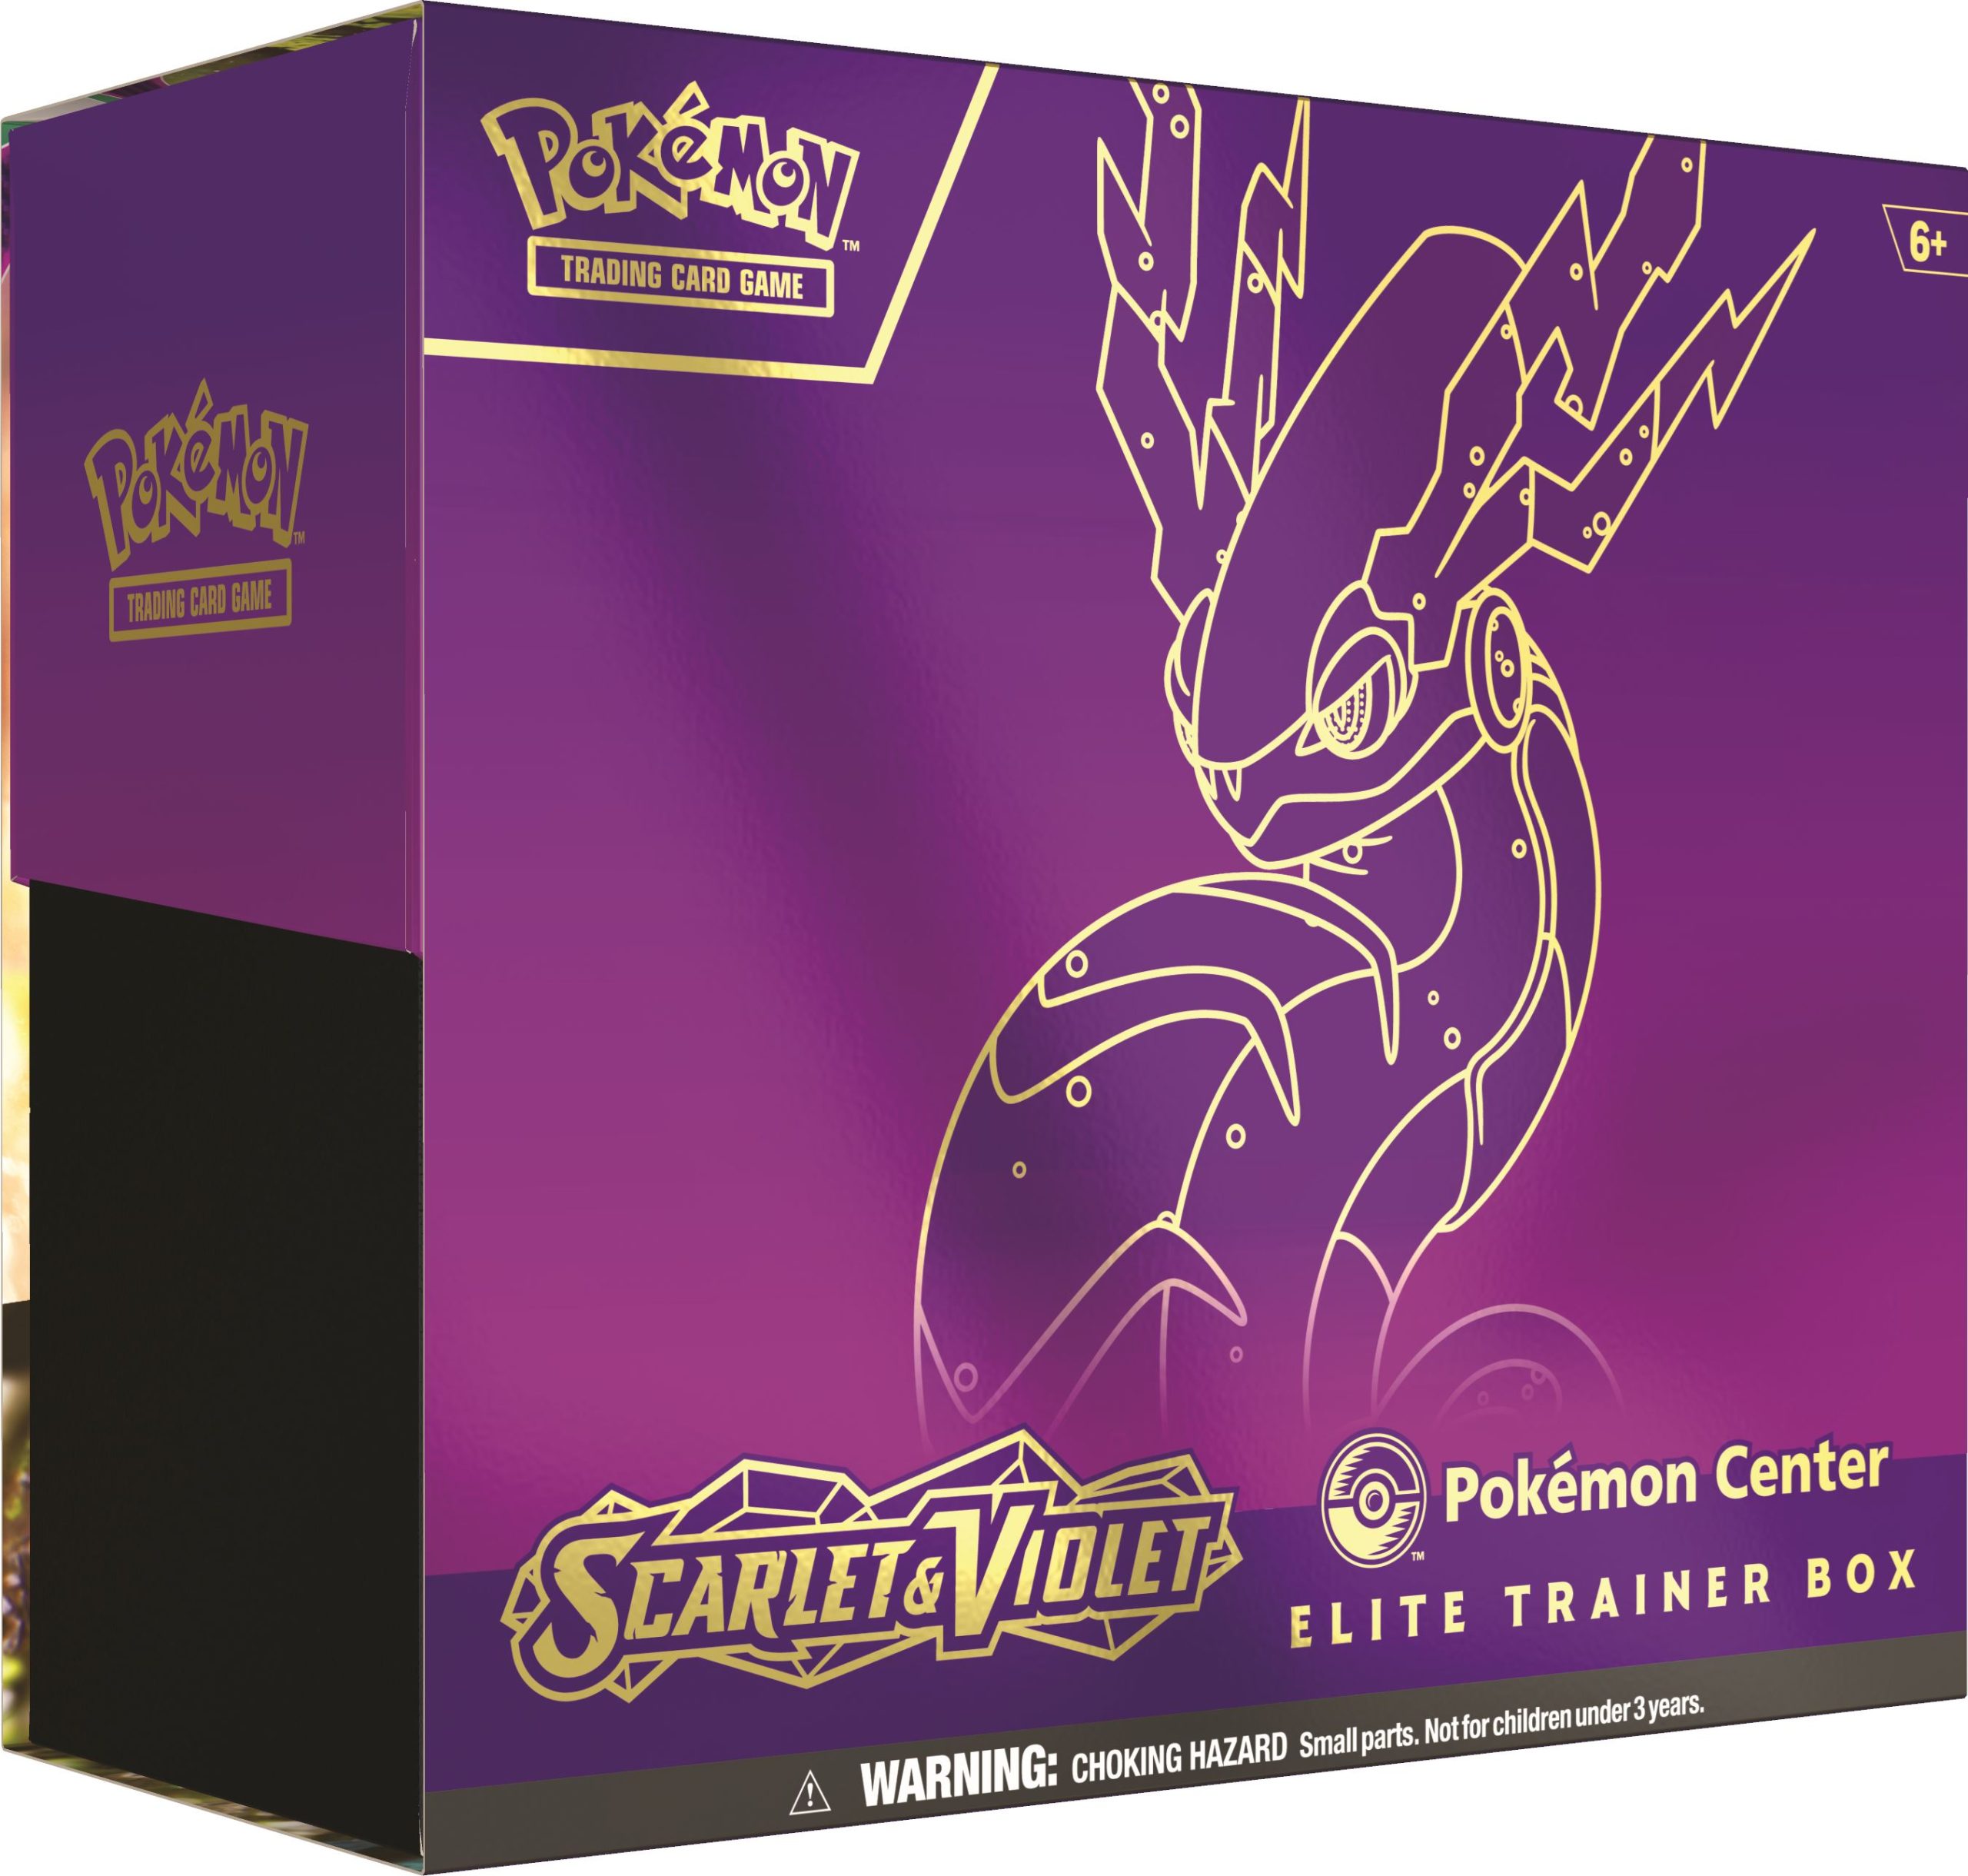  Pokemon TCG: Scarlet and Violet Elite Trainer Box - Koraidon  Red (1 Full Art Promo Card, 9 Boosters and Premium Accessories) : Toys &  Games